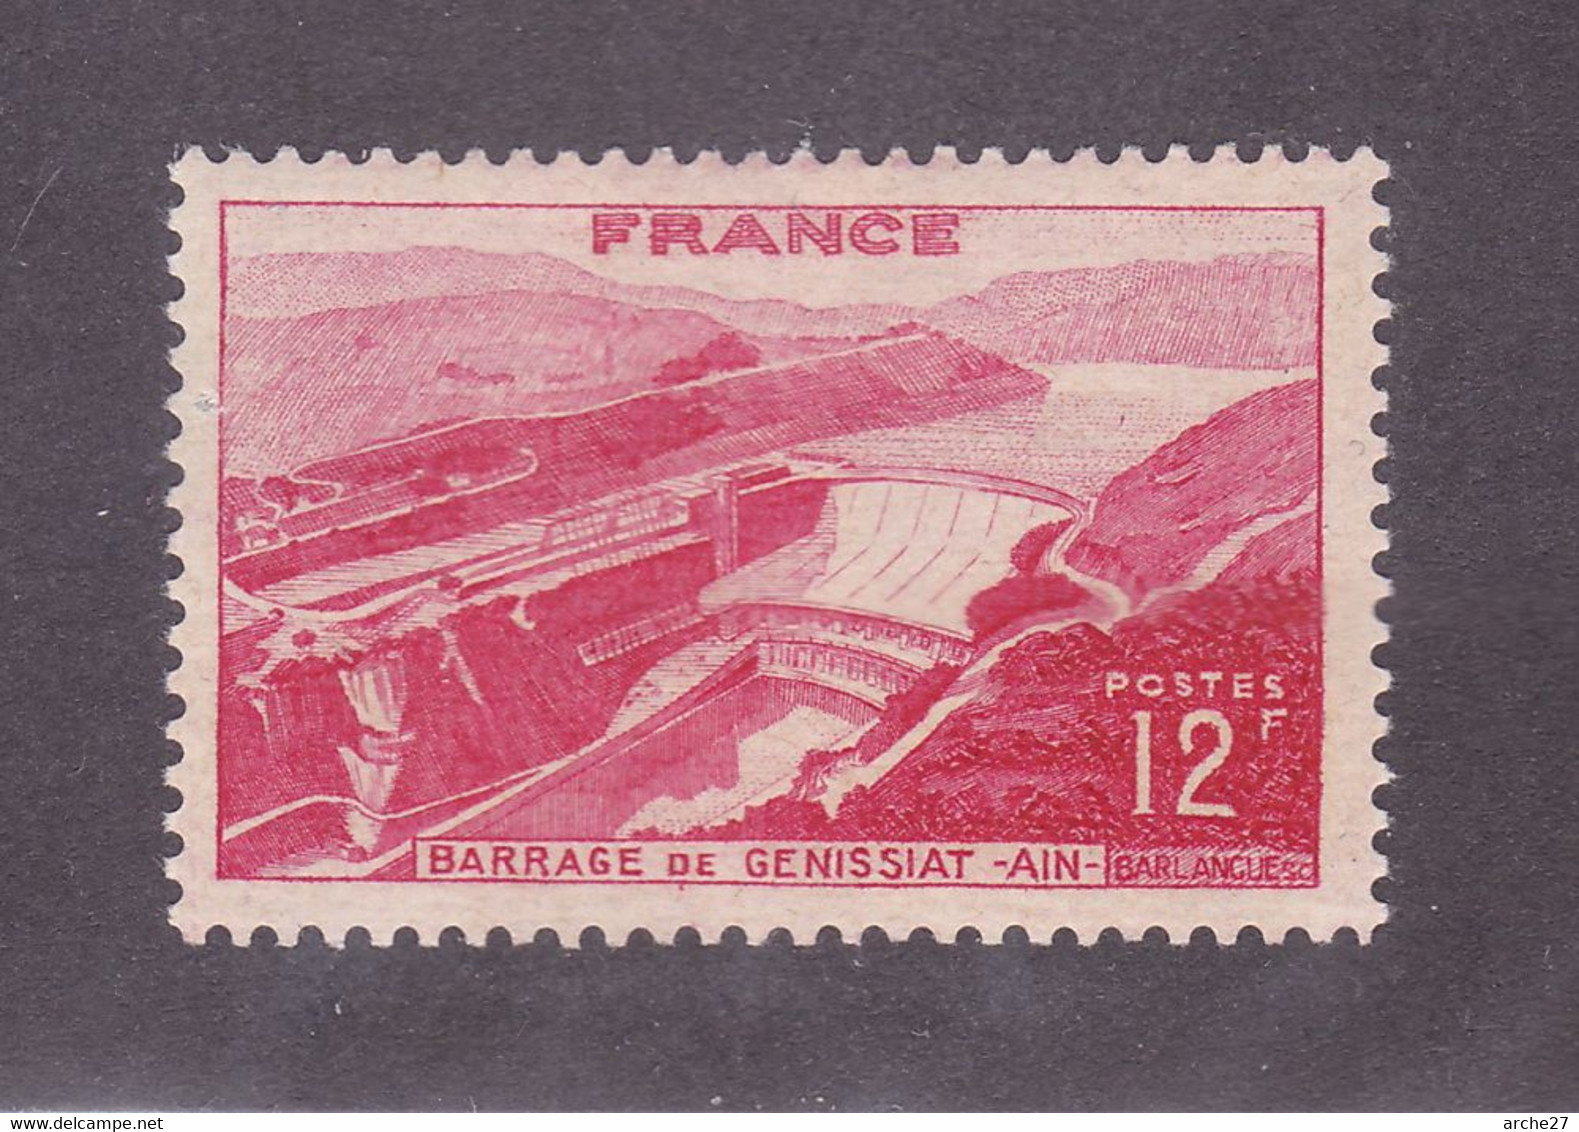 TIMBRE FRANCE N° 817 NEUF ** - Neufs